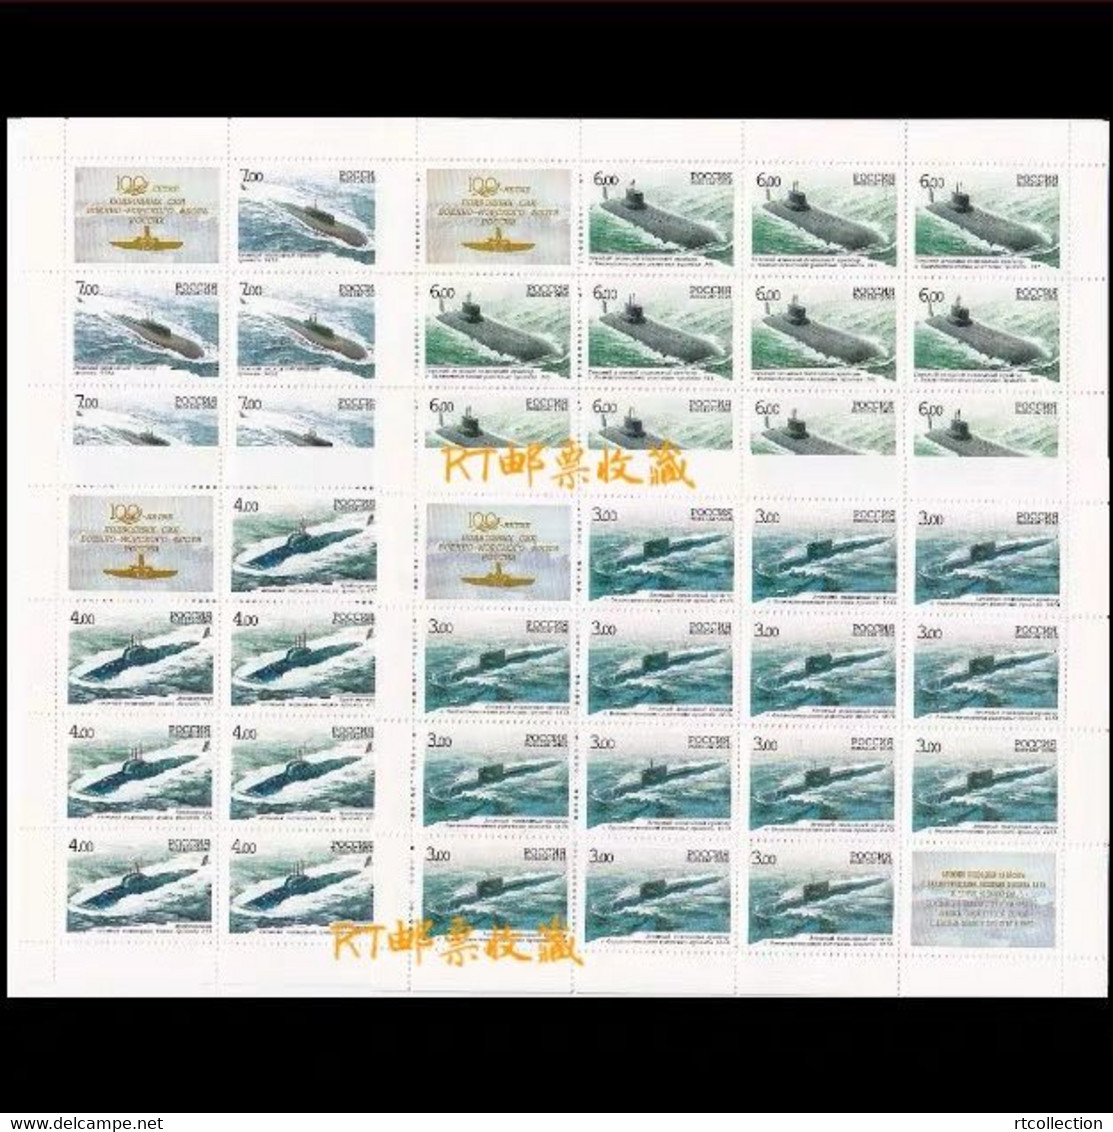 Russia 2006 Sheet 100th Anniversary Russian Submarine Forces Submarines Ships Transport Military Celebrations Stamps MNH - Hojas Completas